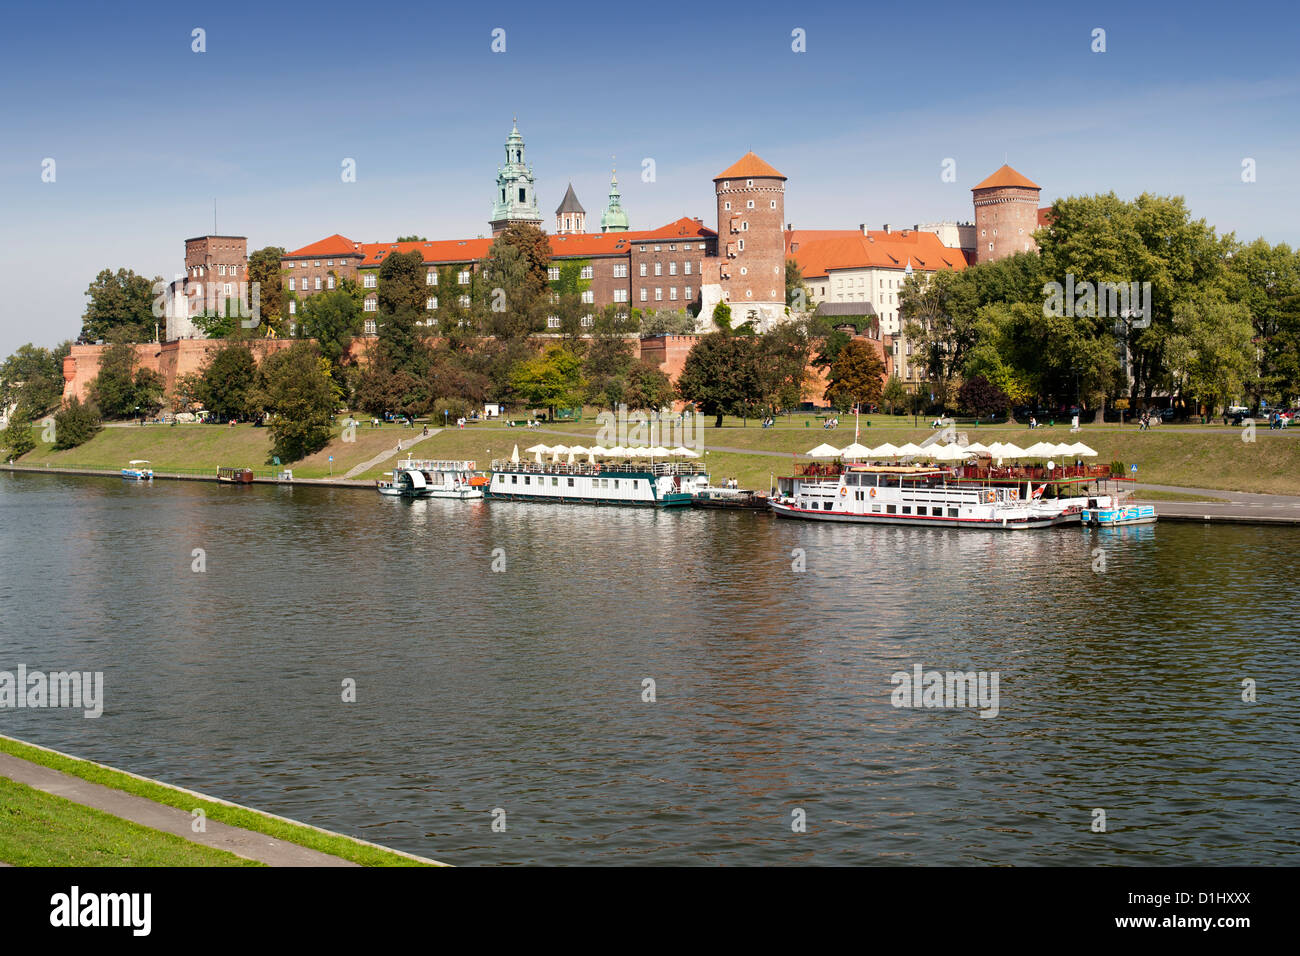 Wawel castle and the Wista River in Krakow in southern Poland. Stock Photo